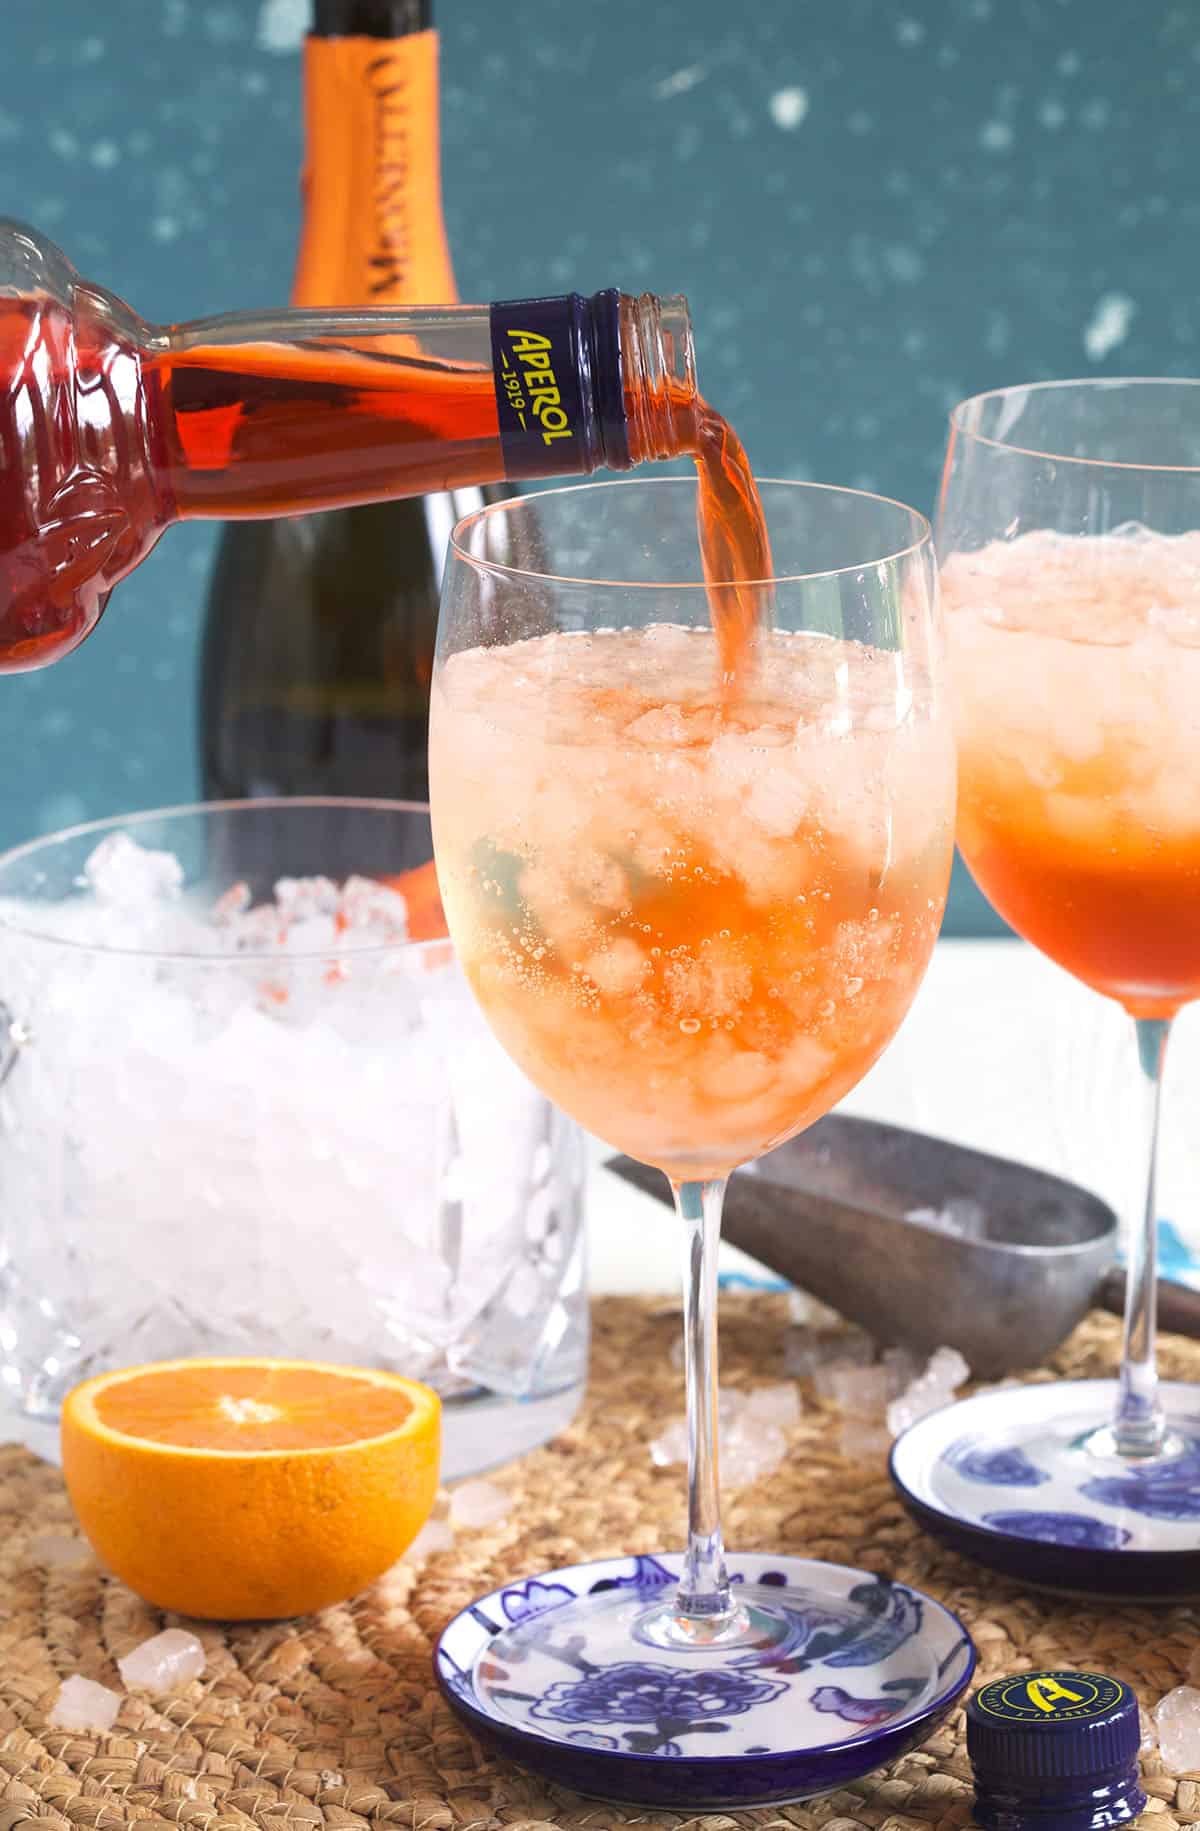 Aperol is being poured into a glass filled with ice and prosecco. 